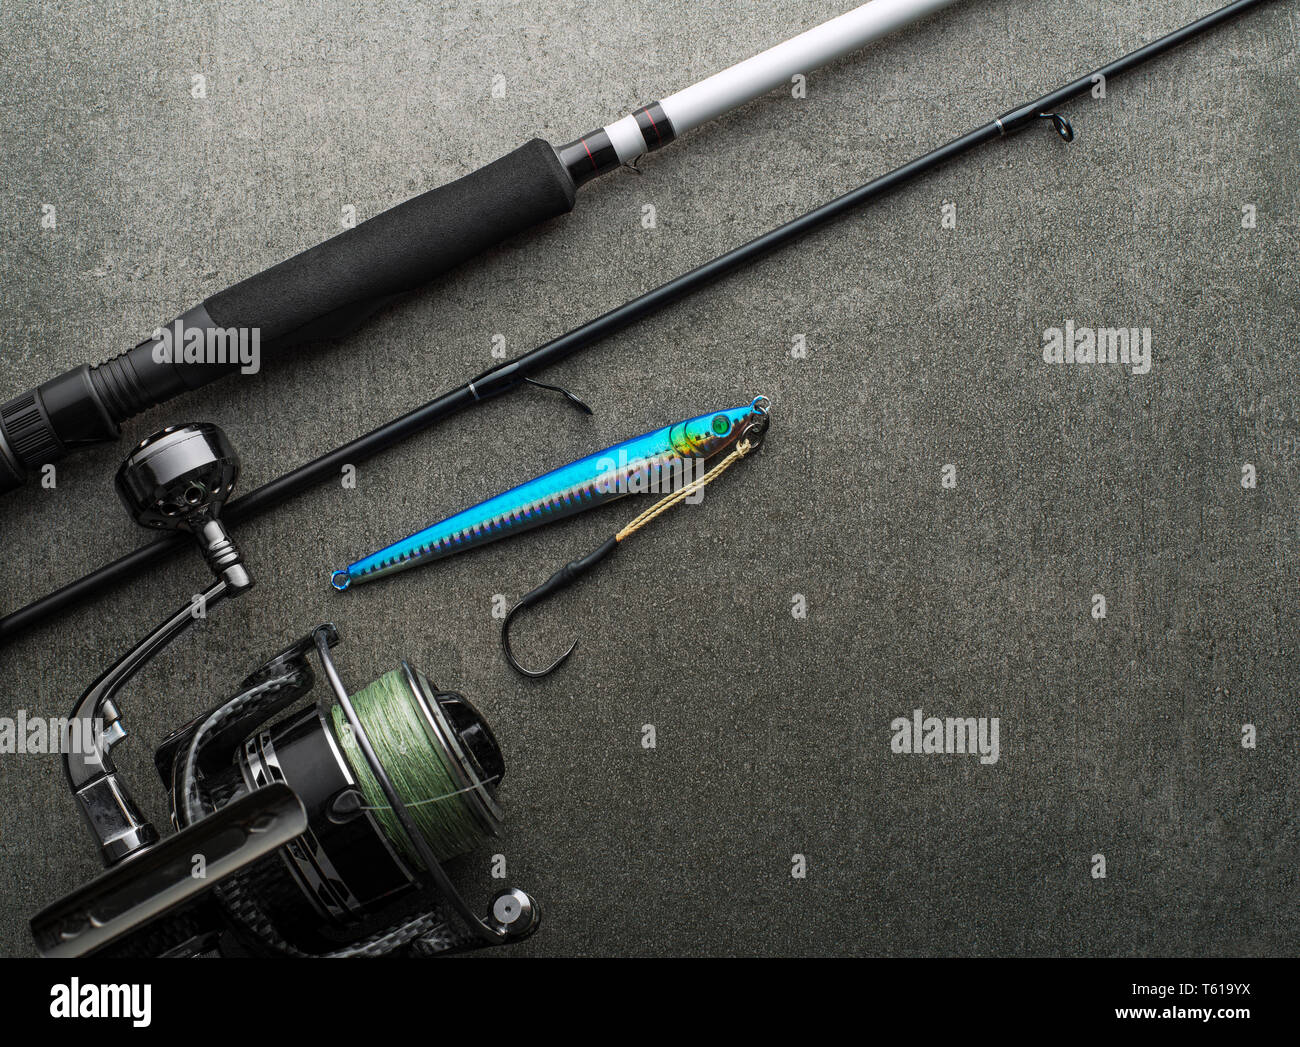 Fishing gear with rod and reel with line ready for jigging on gray